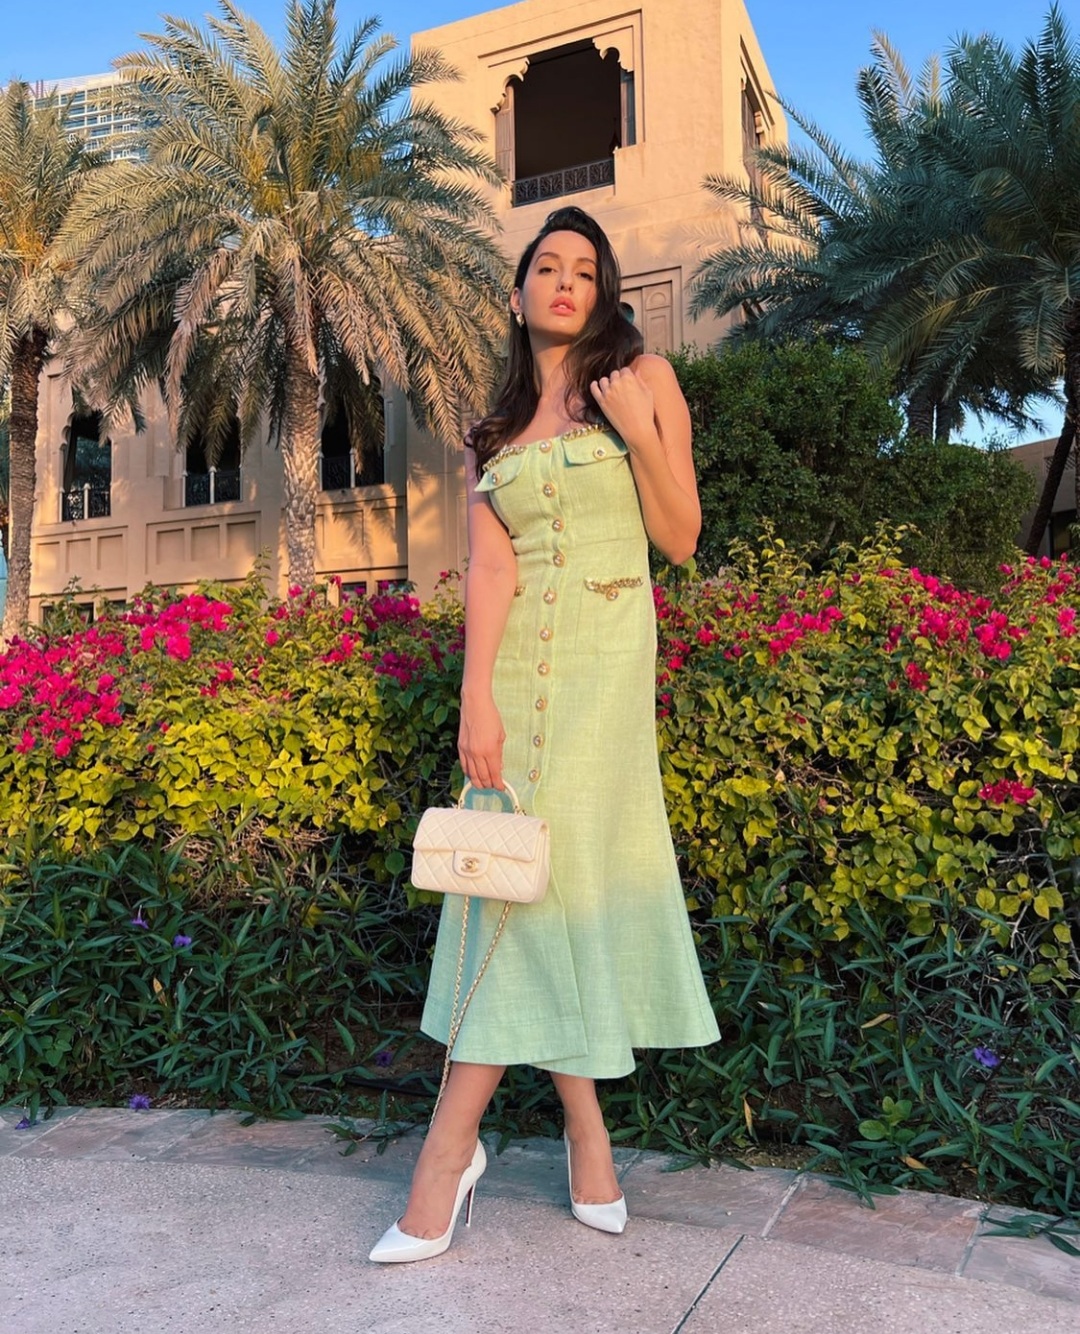 Nora Fatehi travels in style in a mint dress worth $430